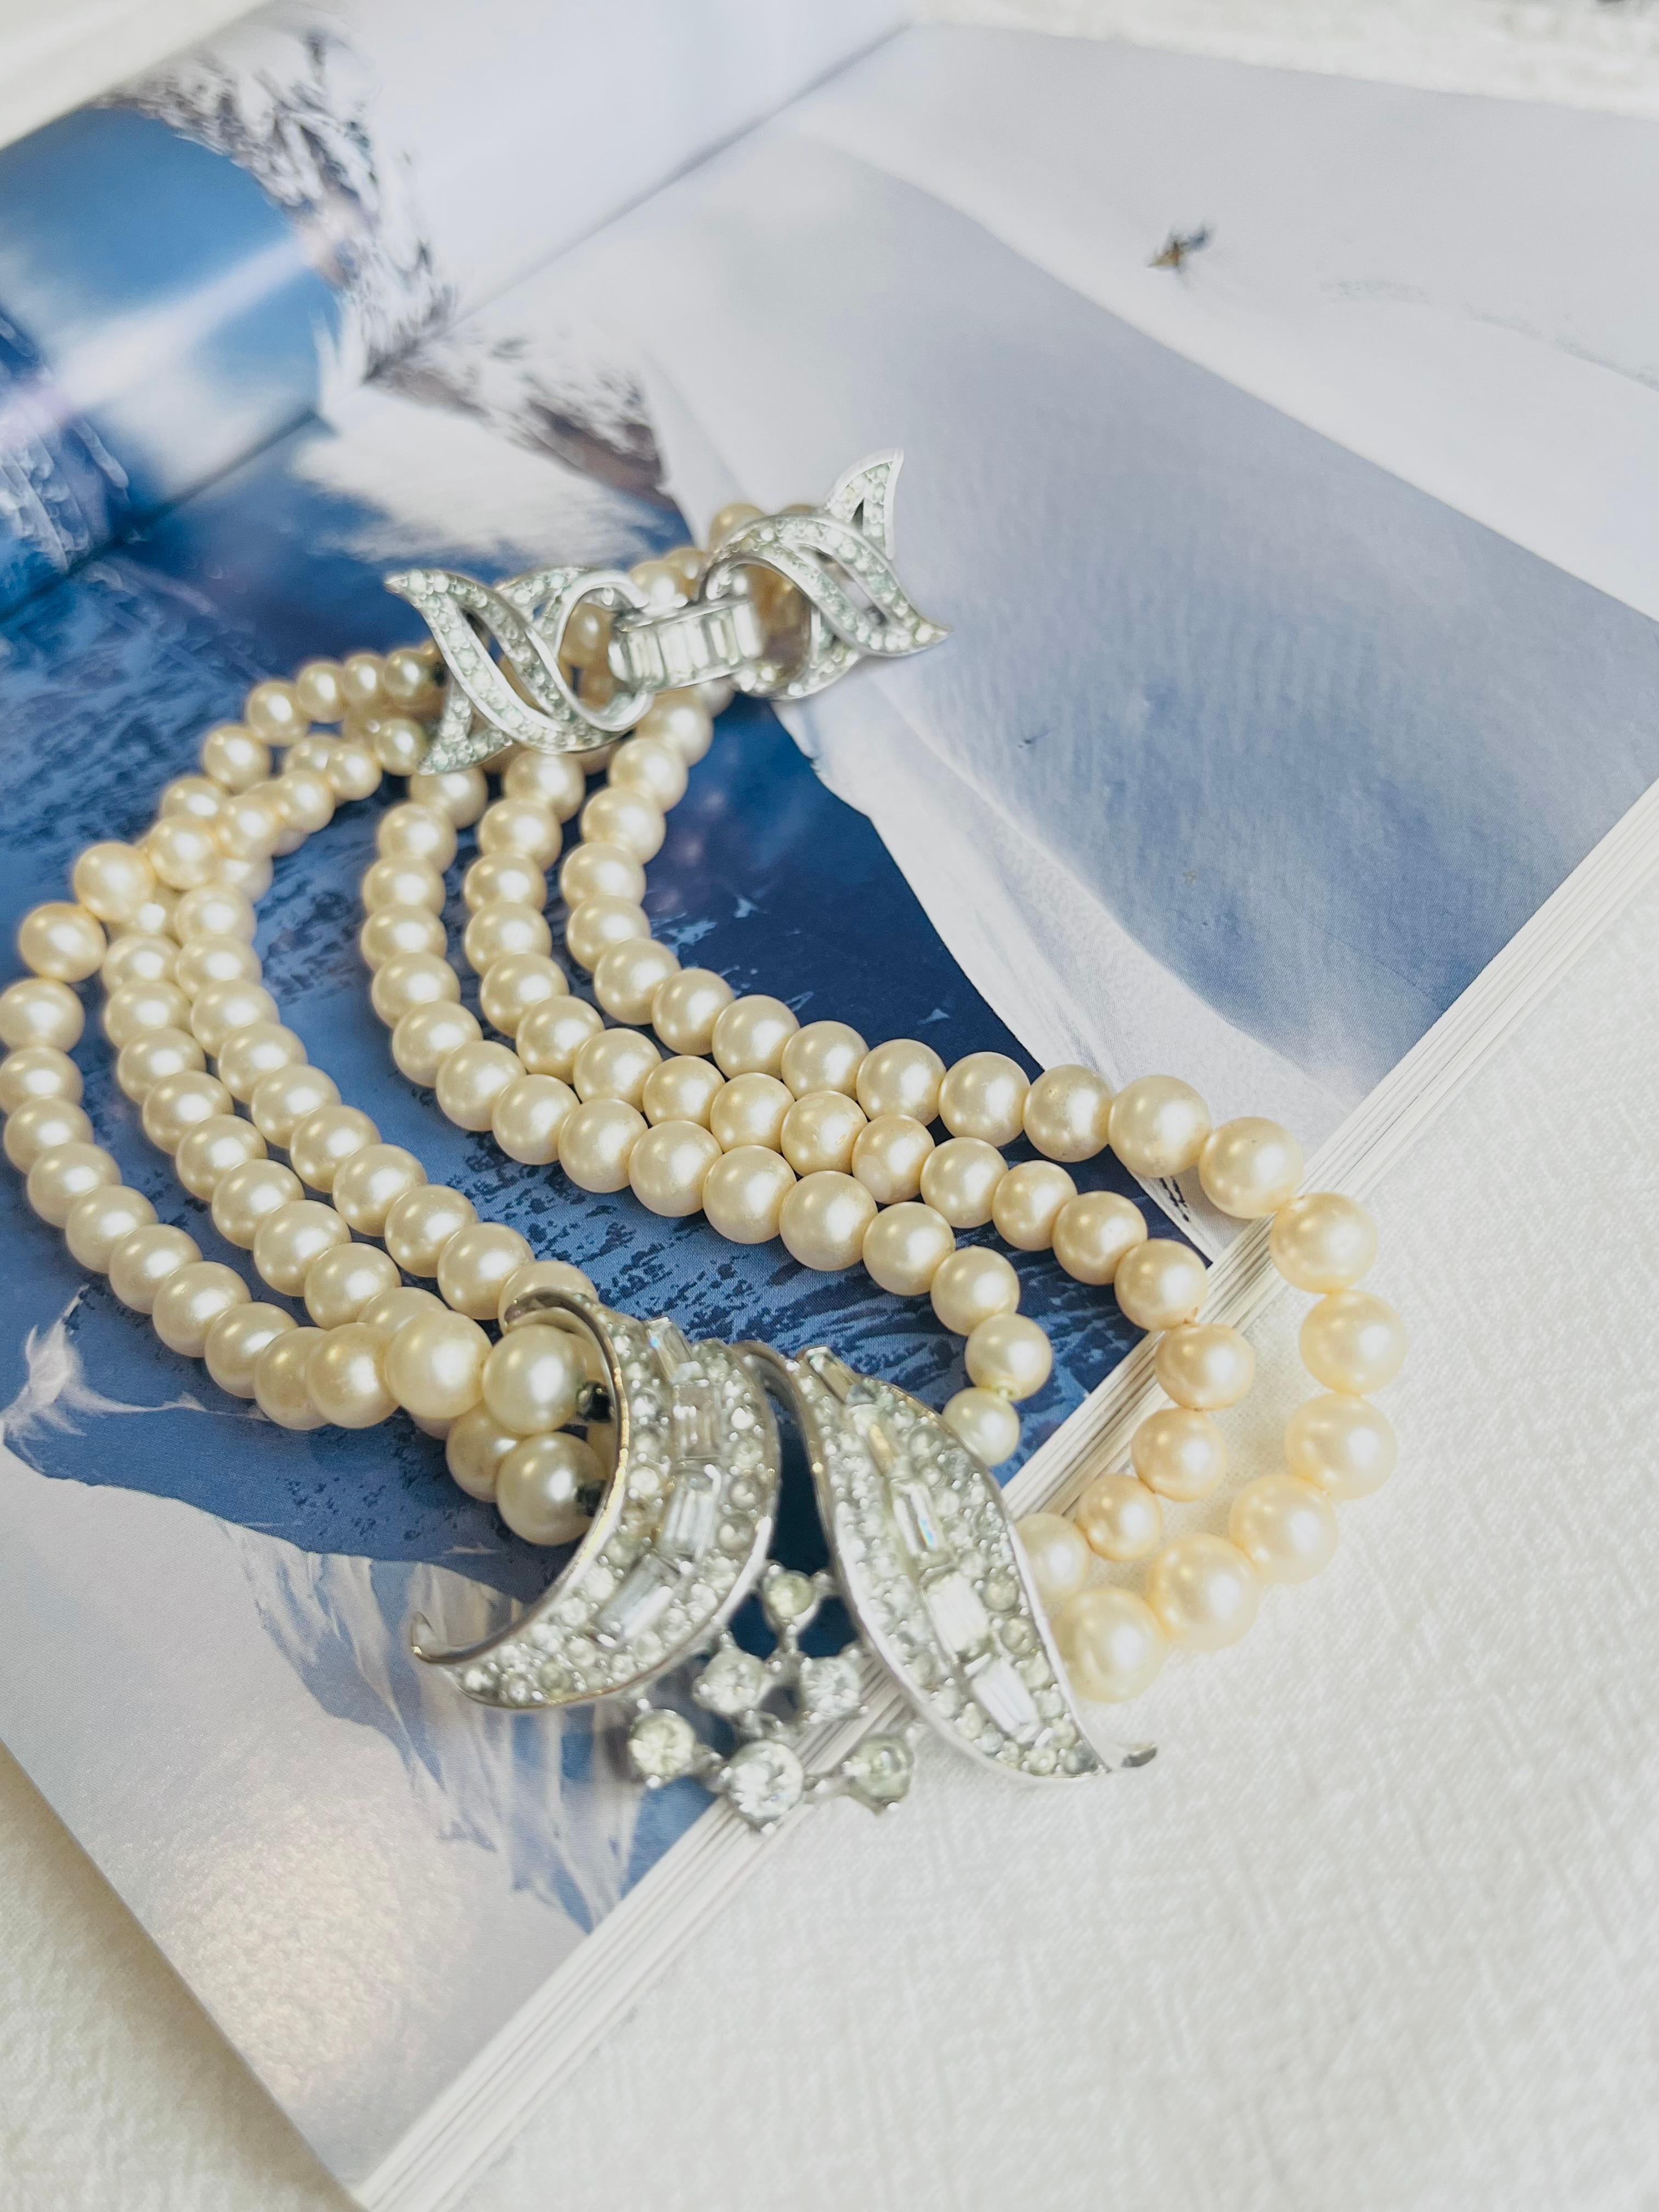 Crown Trifari 1940s Trio Strands Layer White Pearls Crystals Pendant Choker Necklace, Silver Tone

Good condition. Very light scratches or colour loss. Rare to find. 100% Genuine. 

A very beautiful necklace, signed at the back.

Material: Silver,